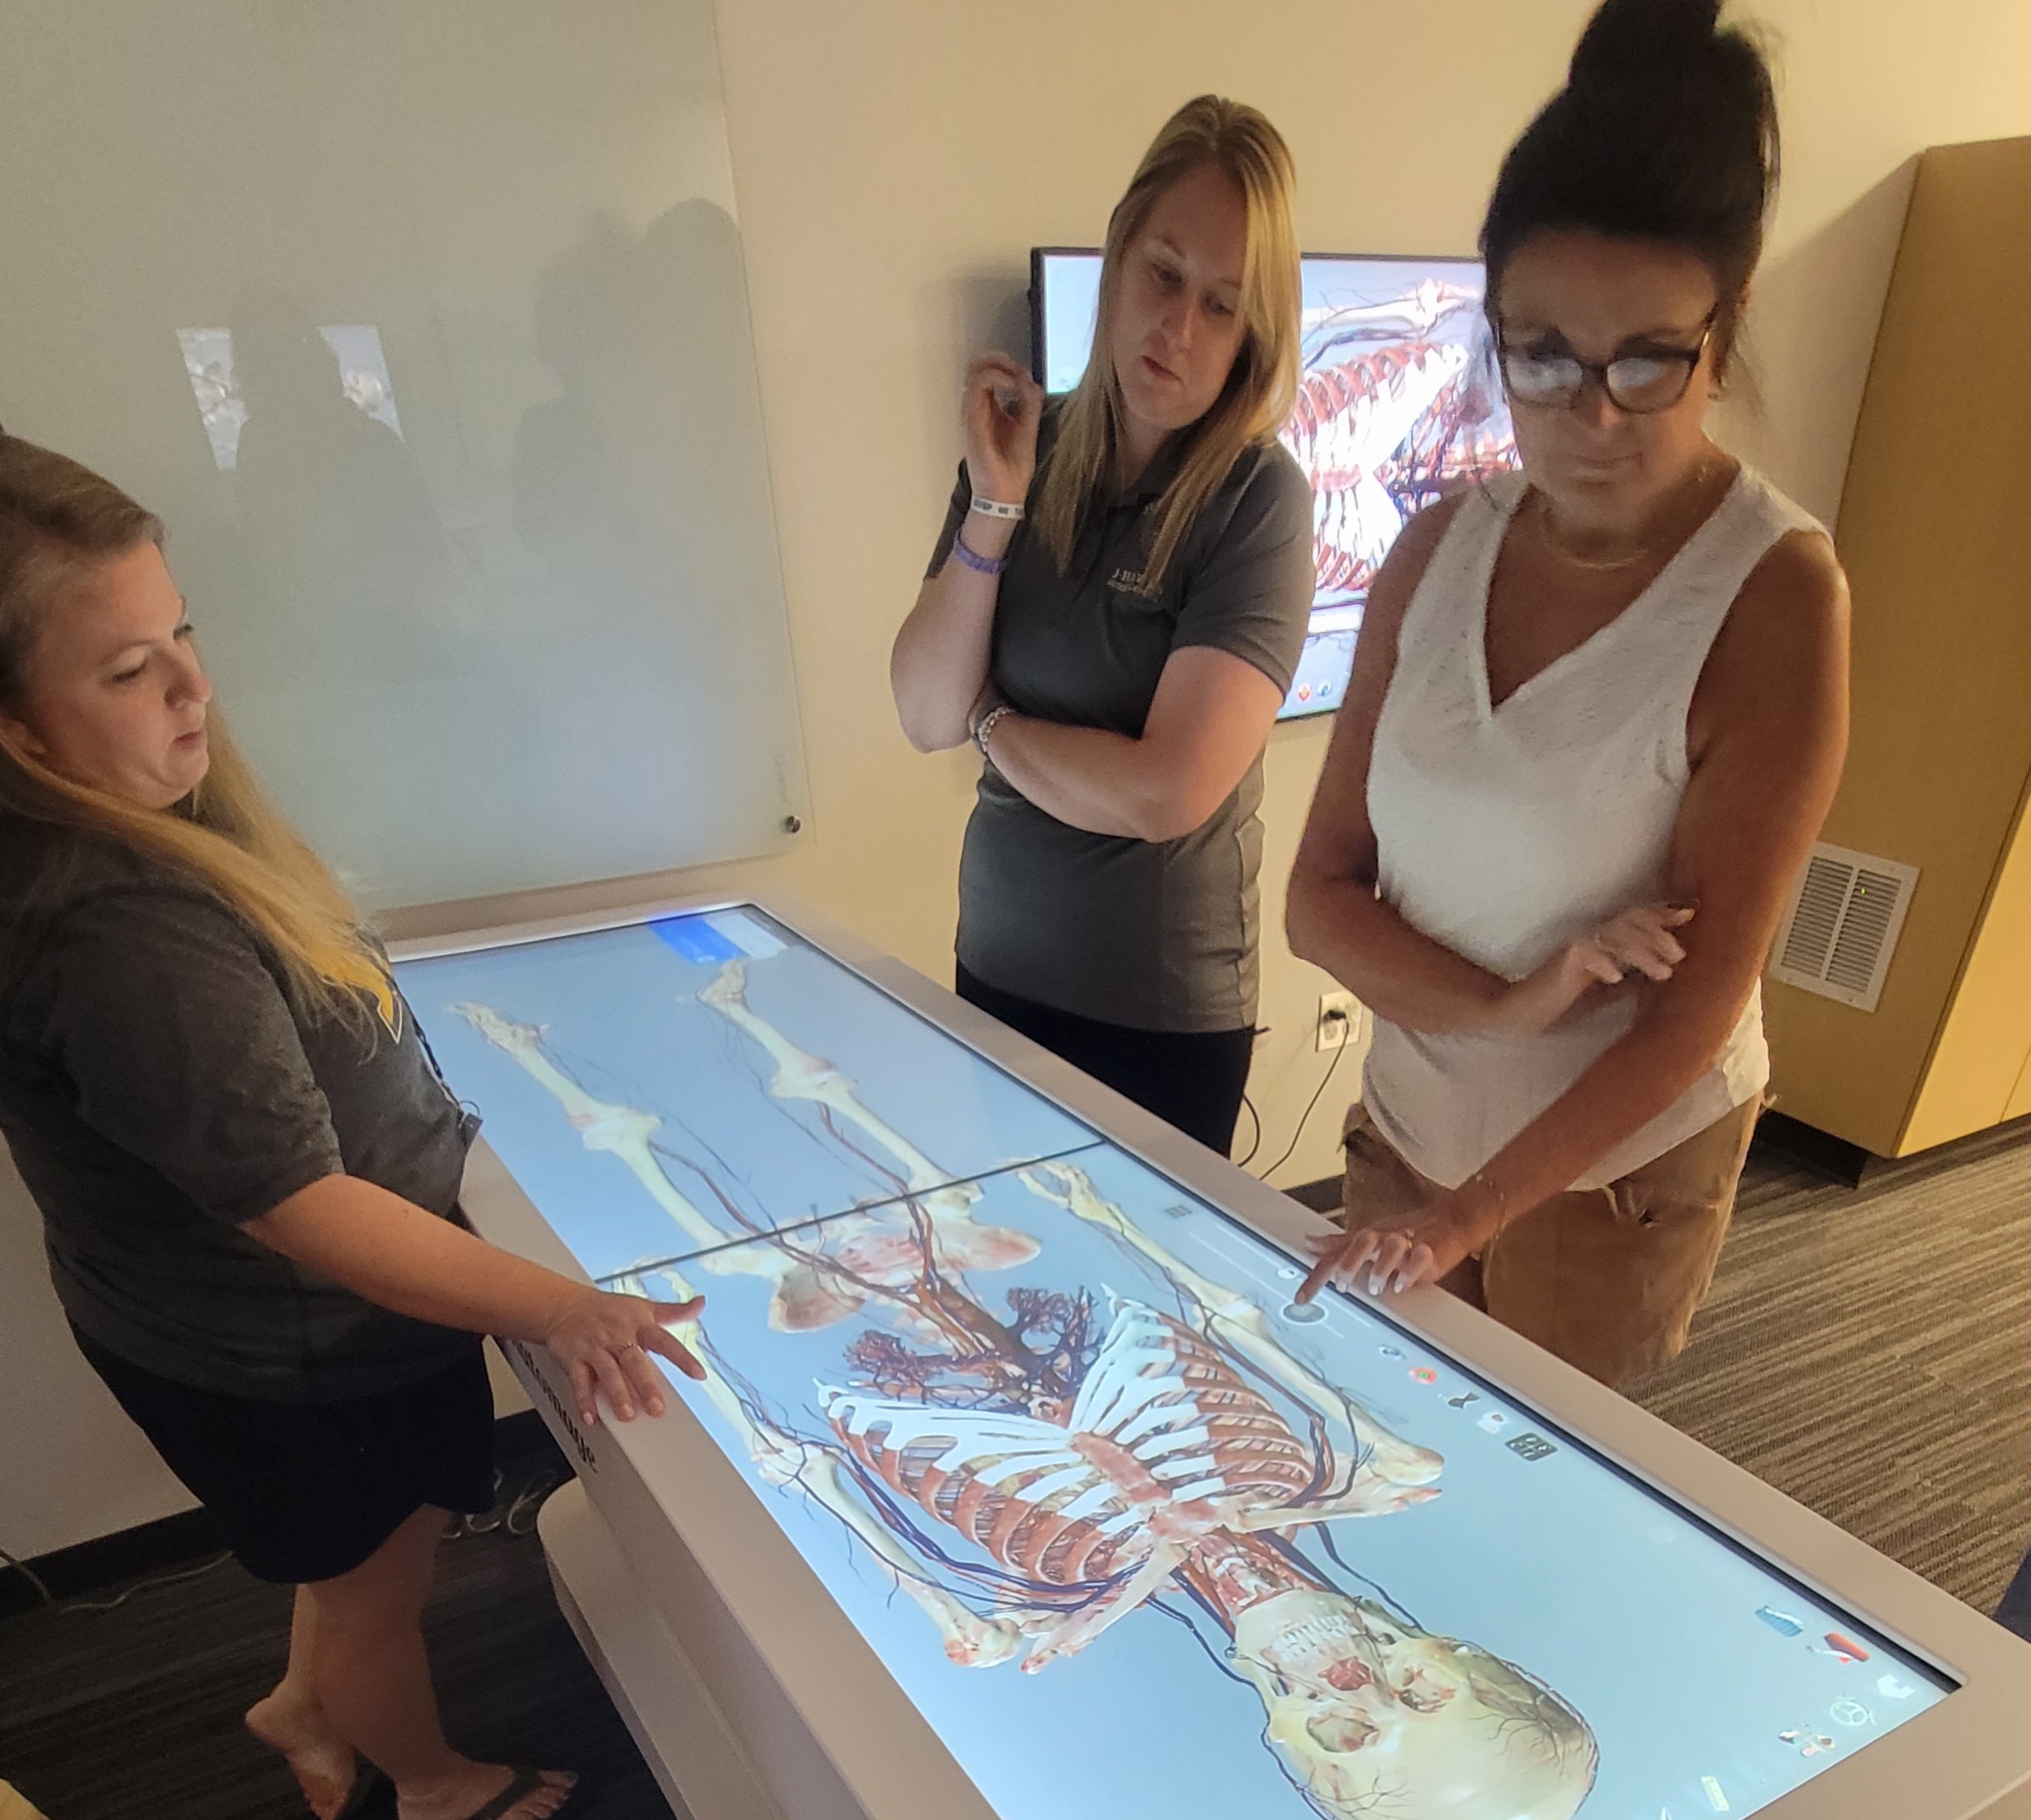 The STEM BEST Program at Prairie High School will engage students and local workplaces with technology advanced healthcare experiences using their new Anatomage Table.